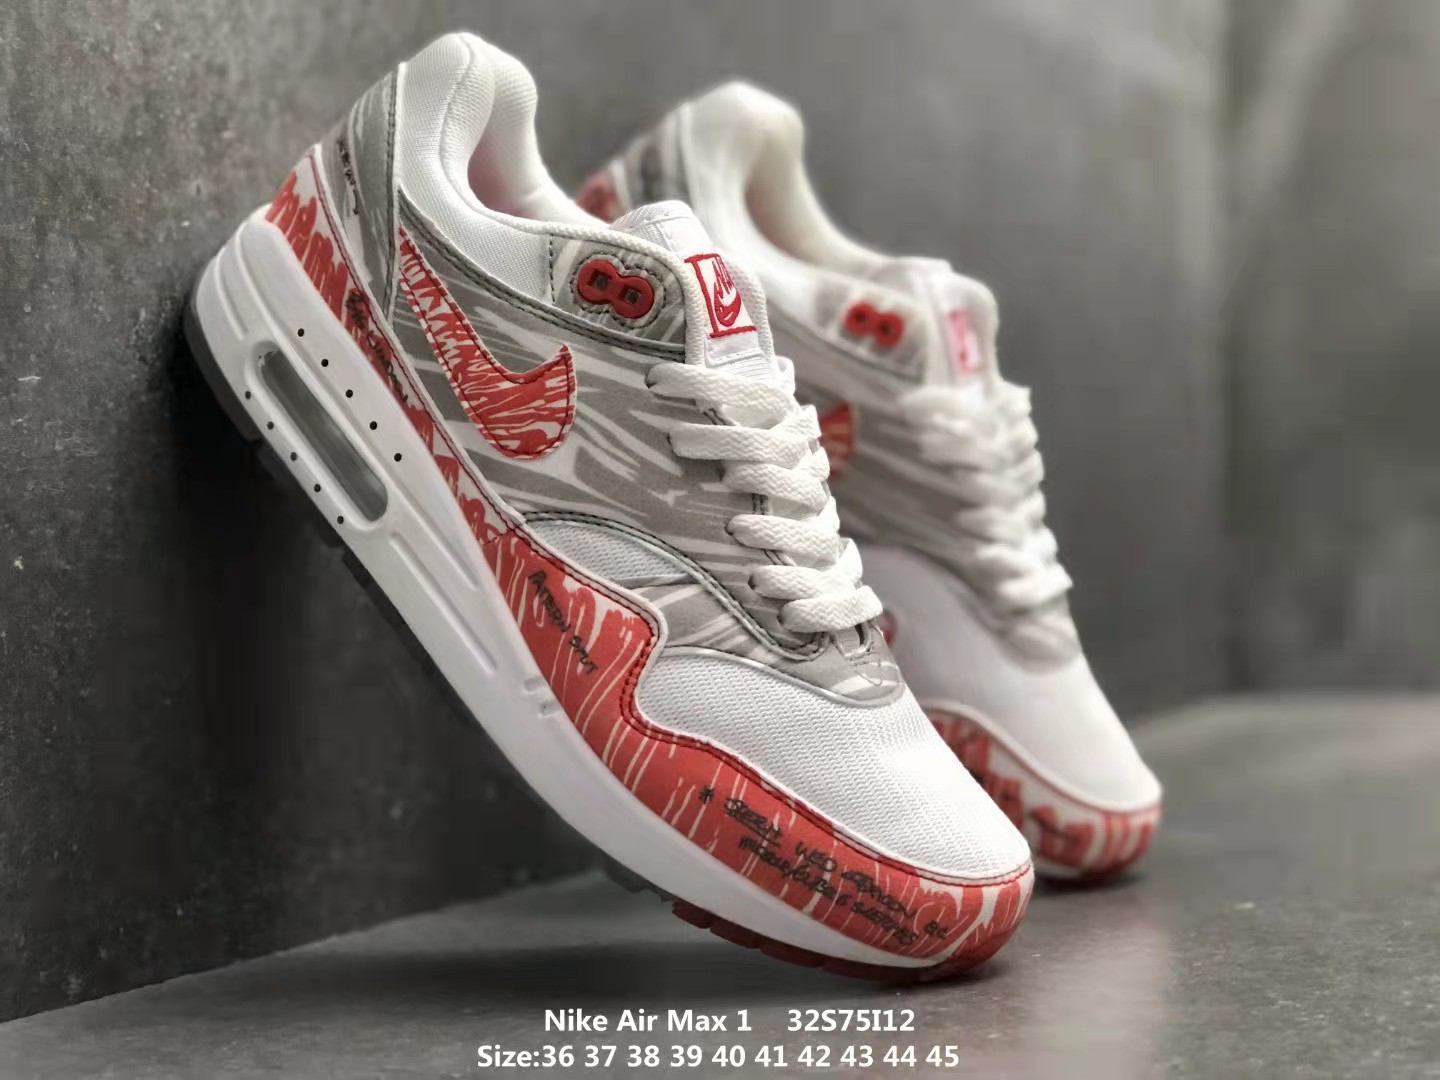 Nike Air Max 1 Tinker Sketch To Shelf Grey Red White Shoes